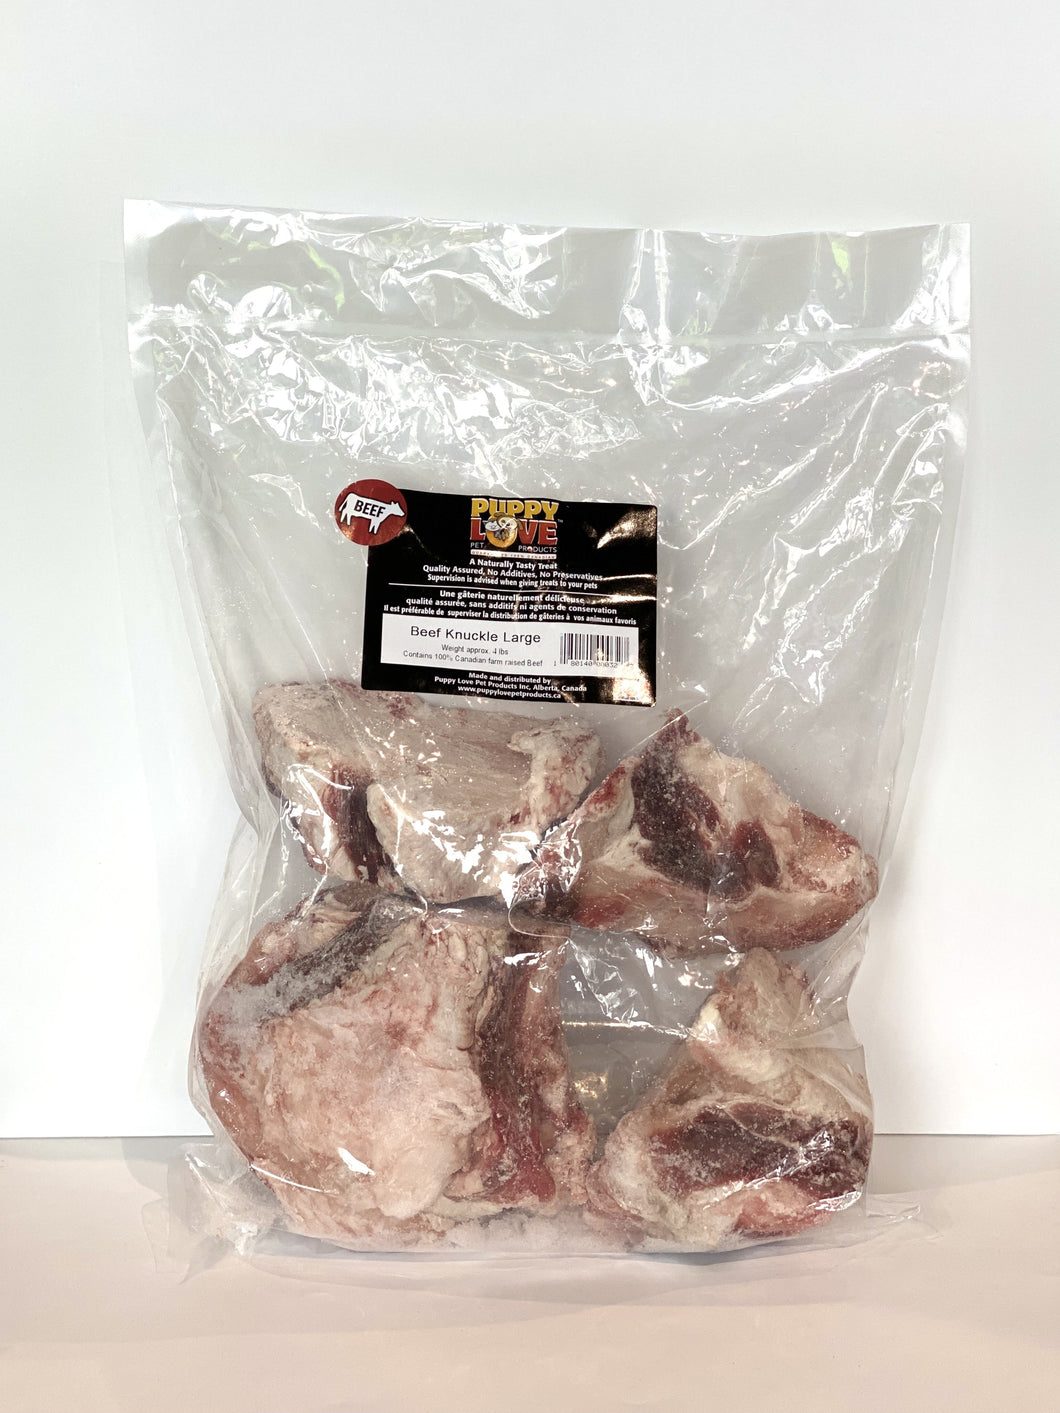 PUPPY LOVE BEEF KNUCKLE 4LB LG